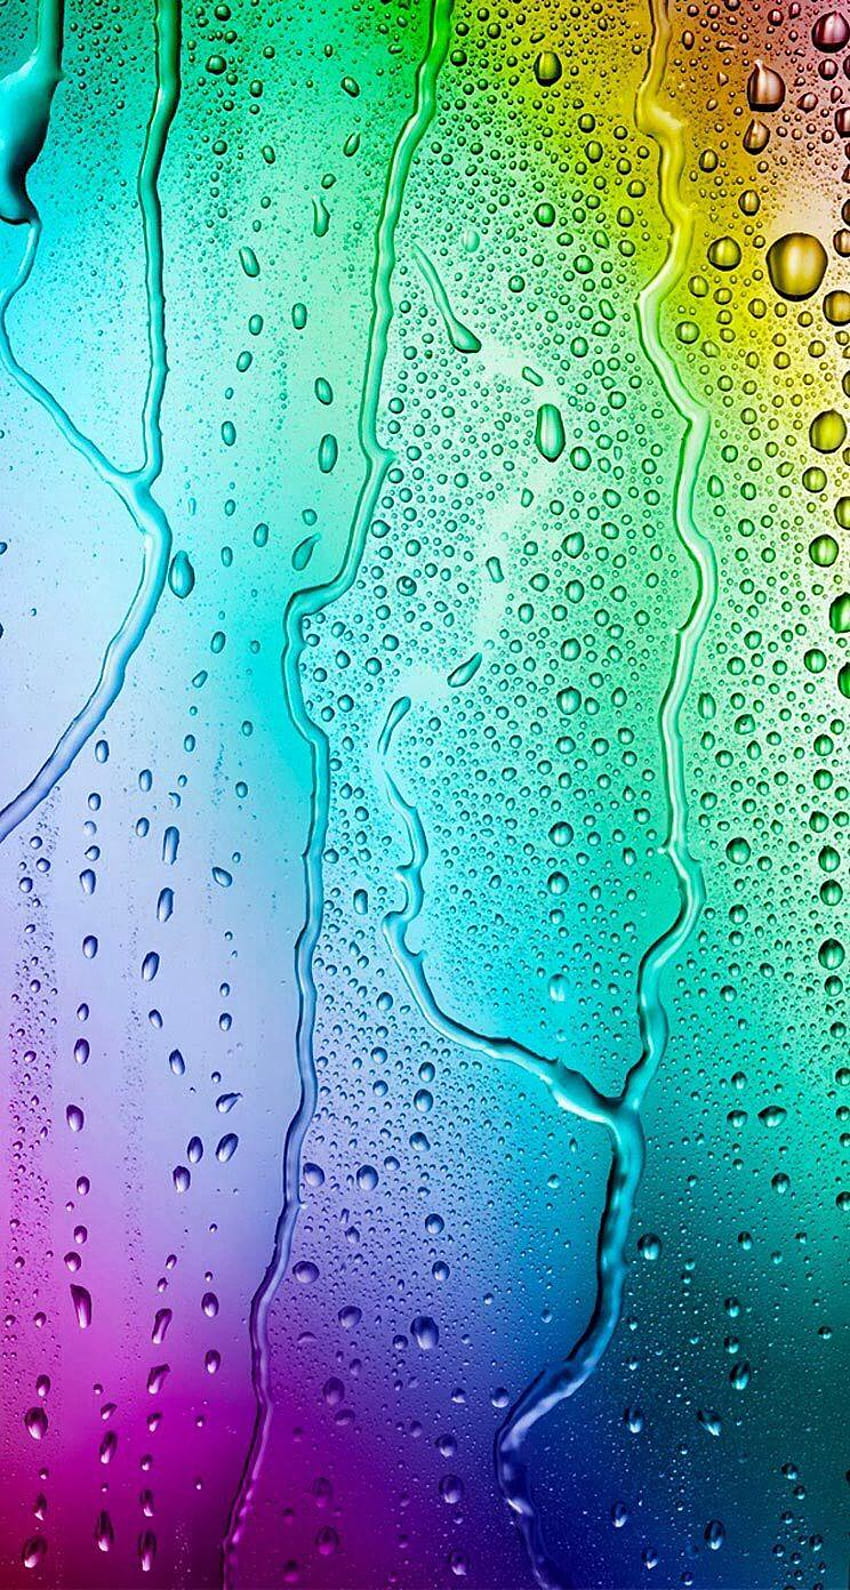 Glass, Rainbow and Drops iPhone backgrounds, rainbow glass HD phone wallpaper